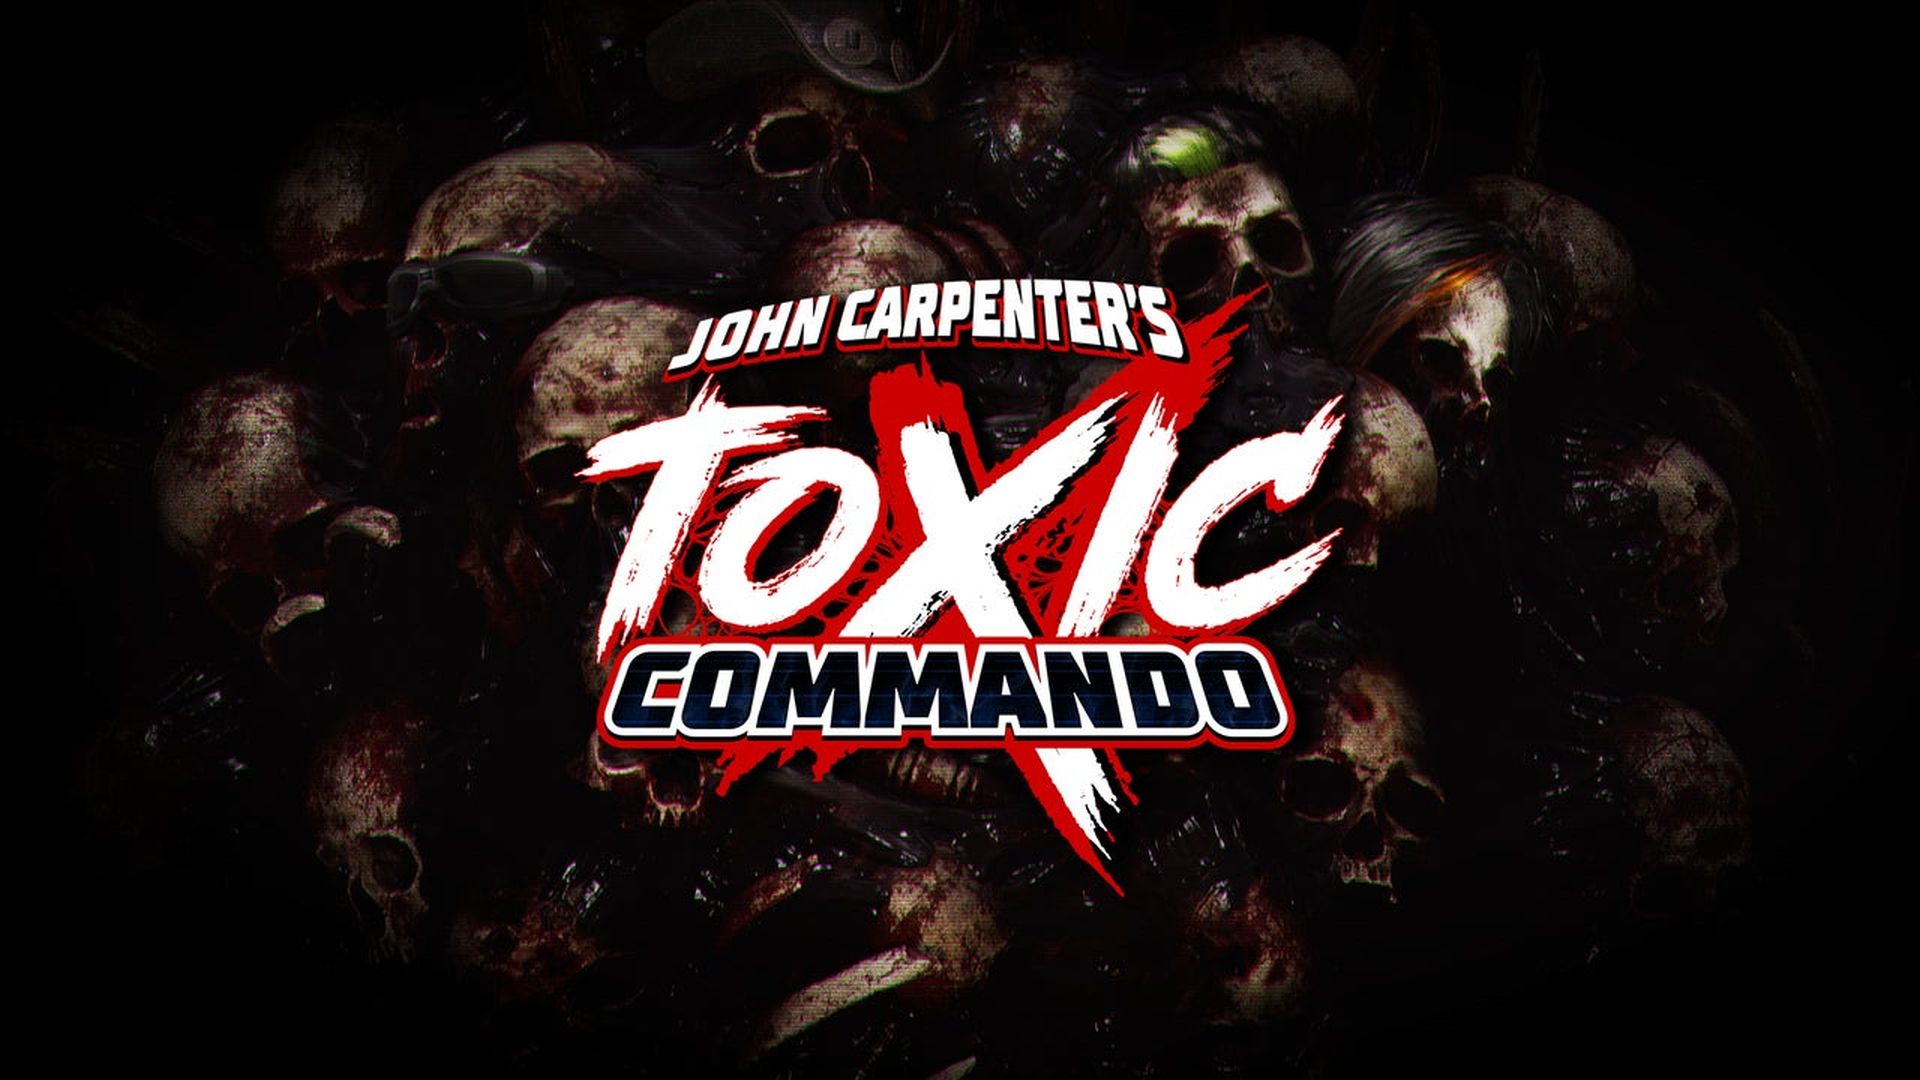 John Carpenter’s Toxic Commando is a Co-Op Shooter Inspired by 80s Horror and Action Movies